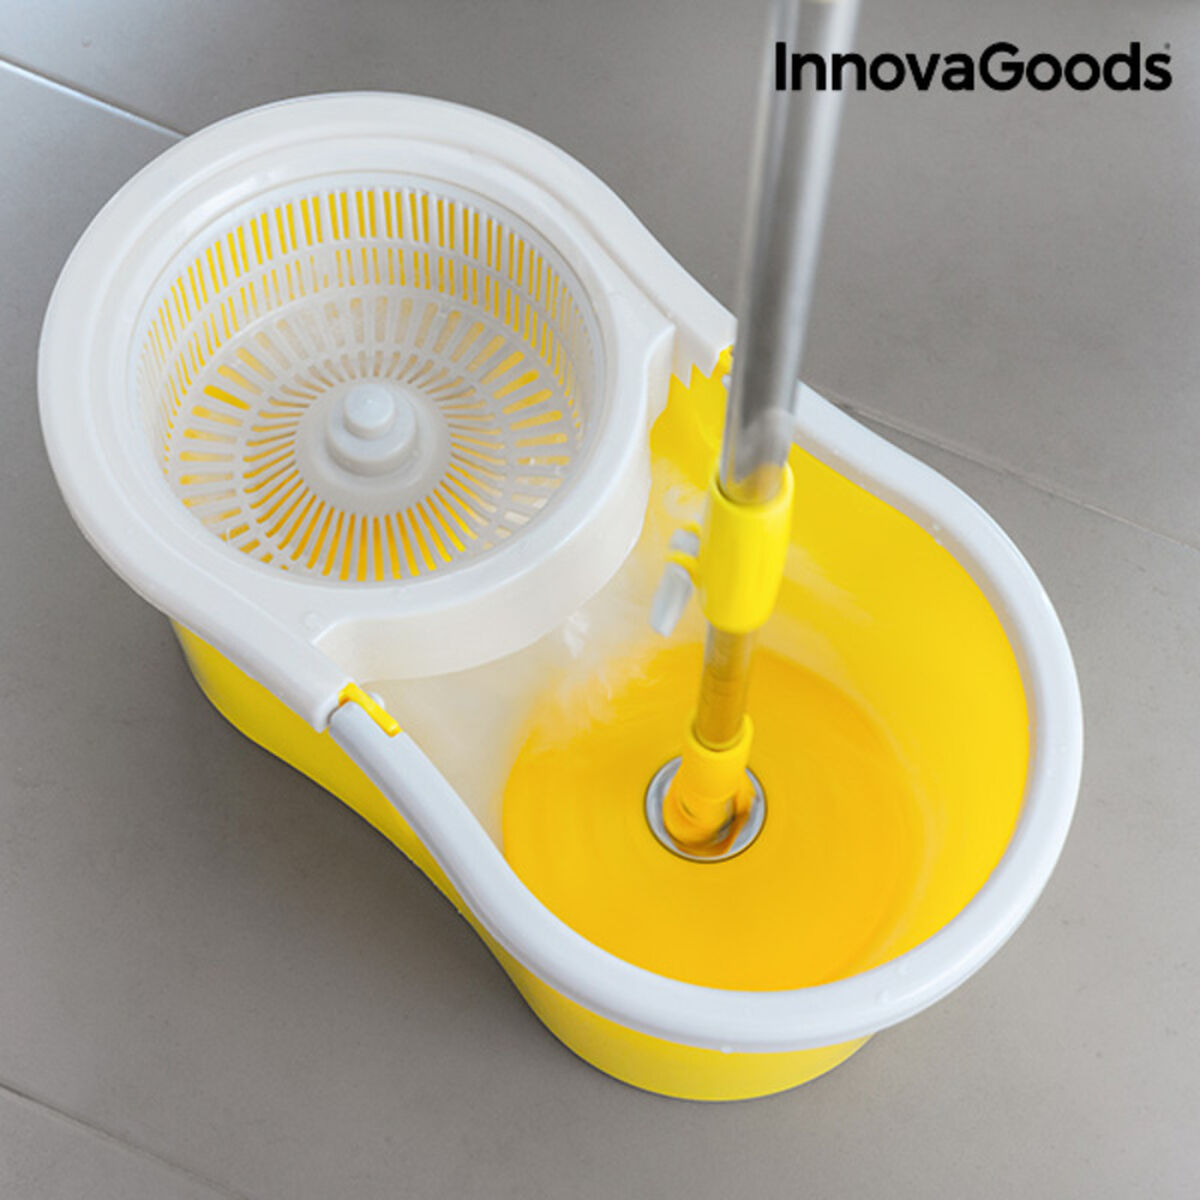 InnovaGoods Double-Action Spinning Mop with Bucket